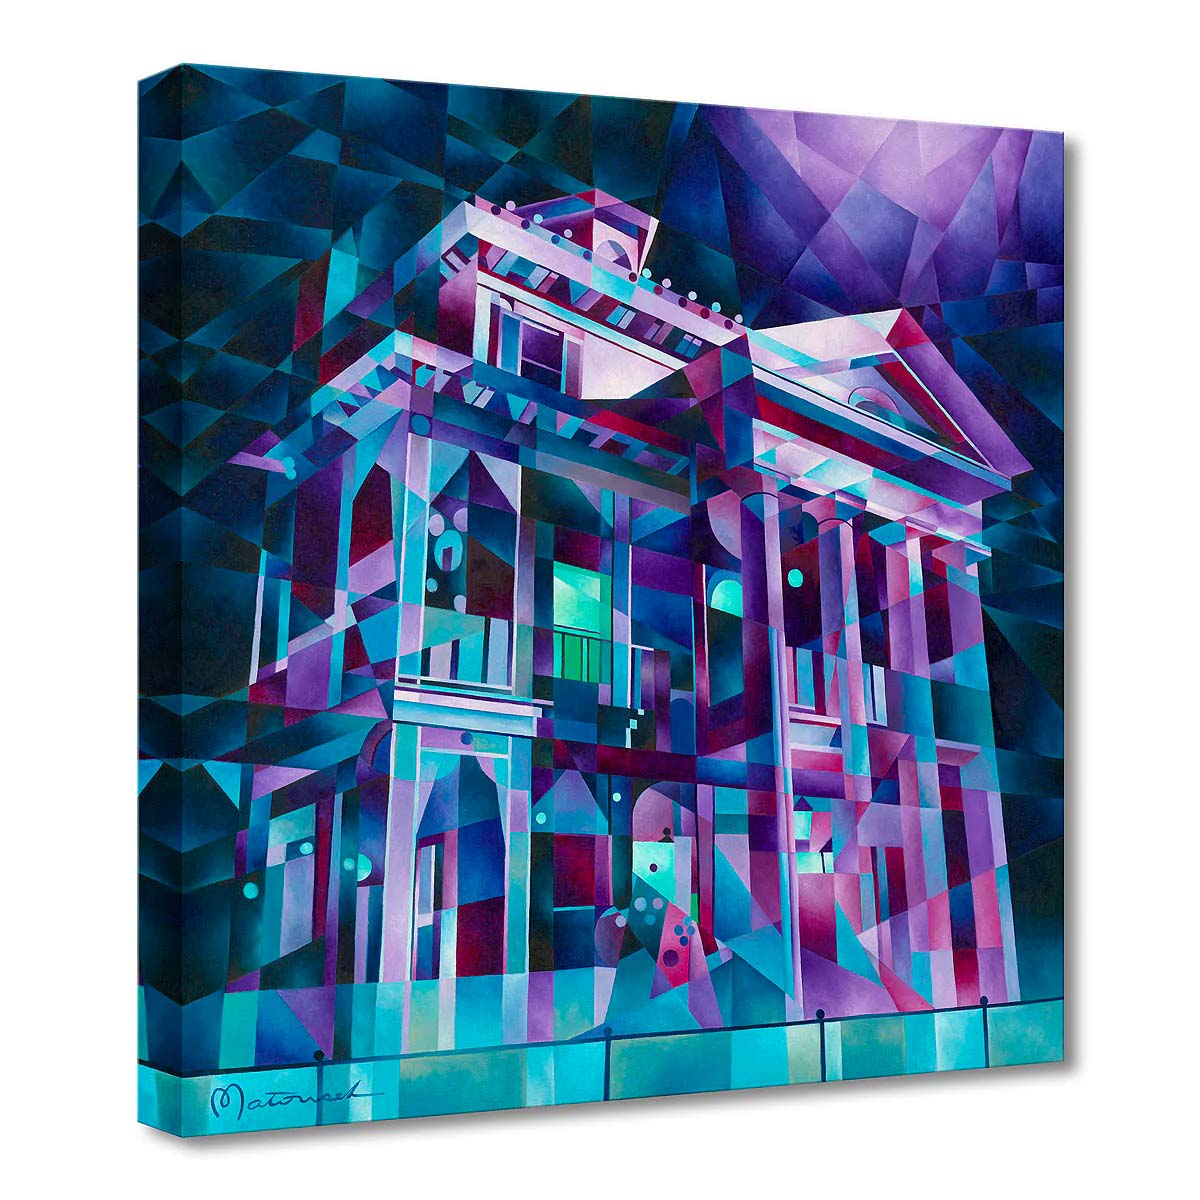 Tom Matousek Disney "The Haunted Mansion" Limited Edition Canvas Giclee